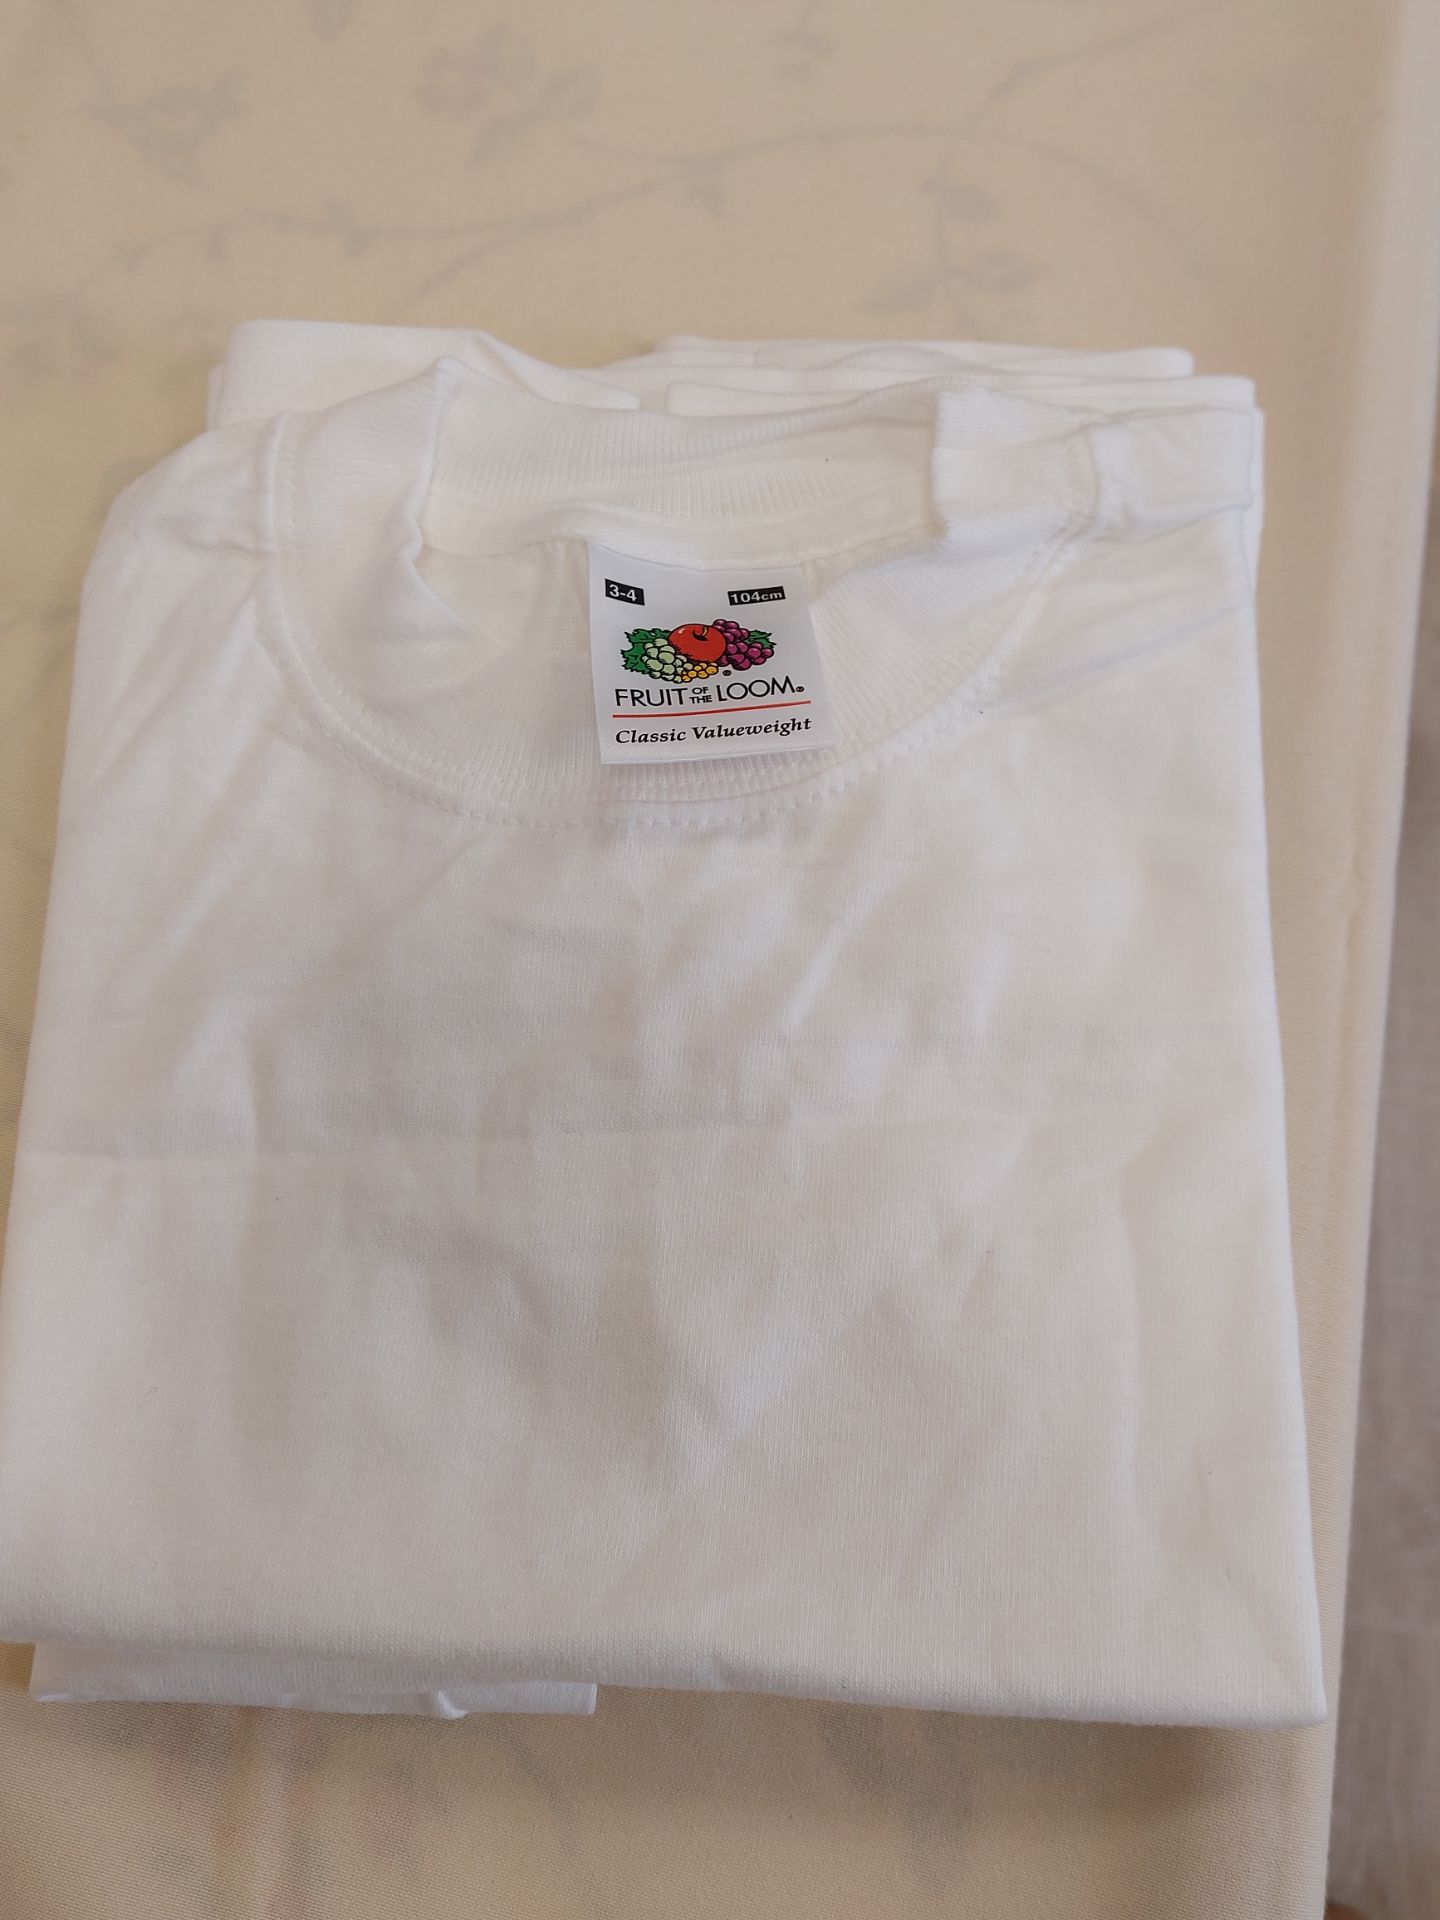 Pack of 6 White Tee-Shirts - Image 2 of 6